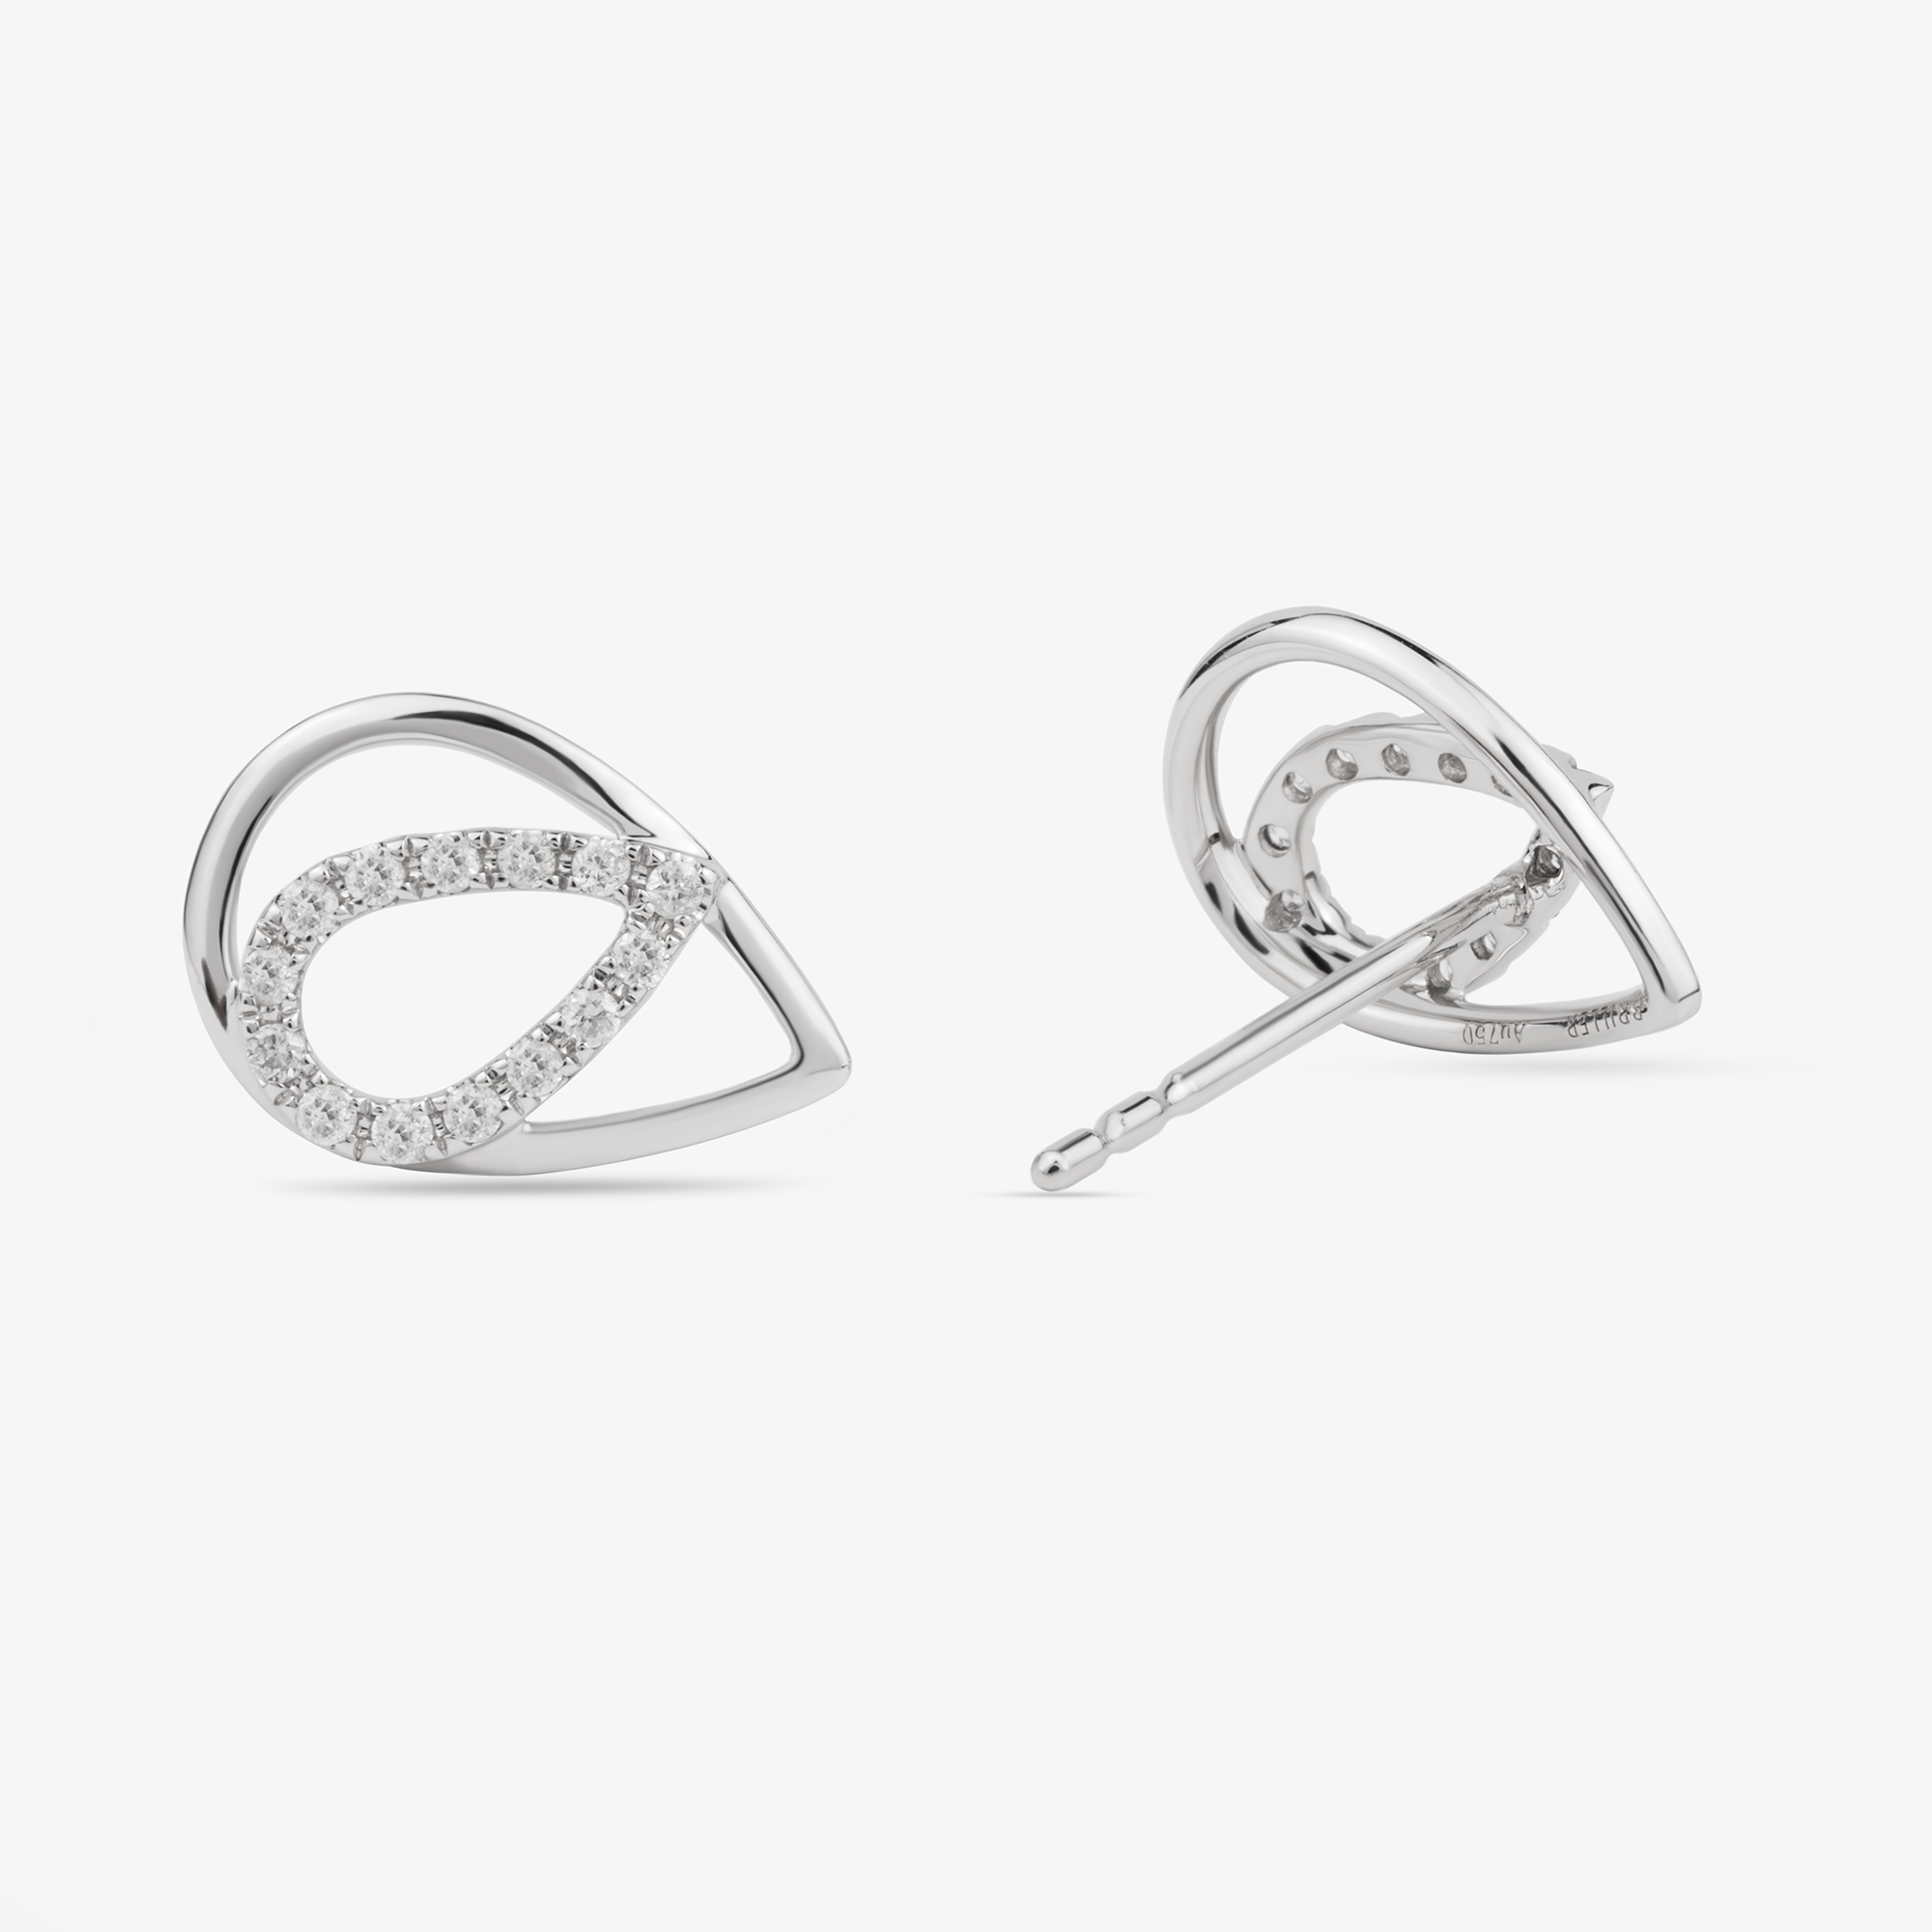 Pear Earrings In 18K Solid White Gold With Diamonds